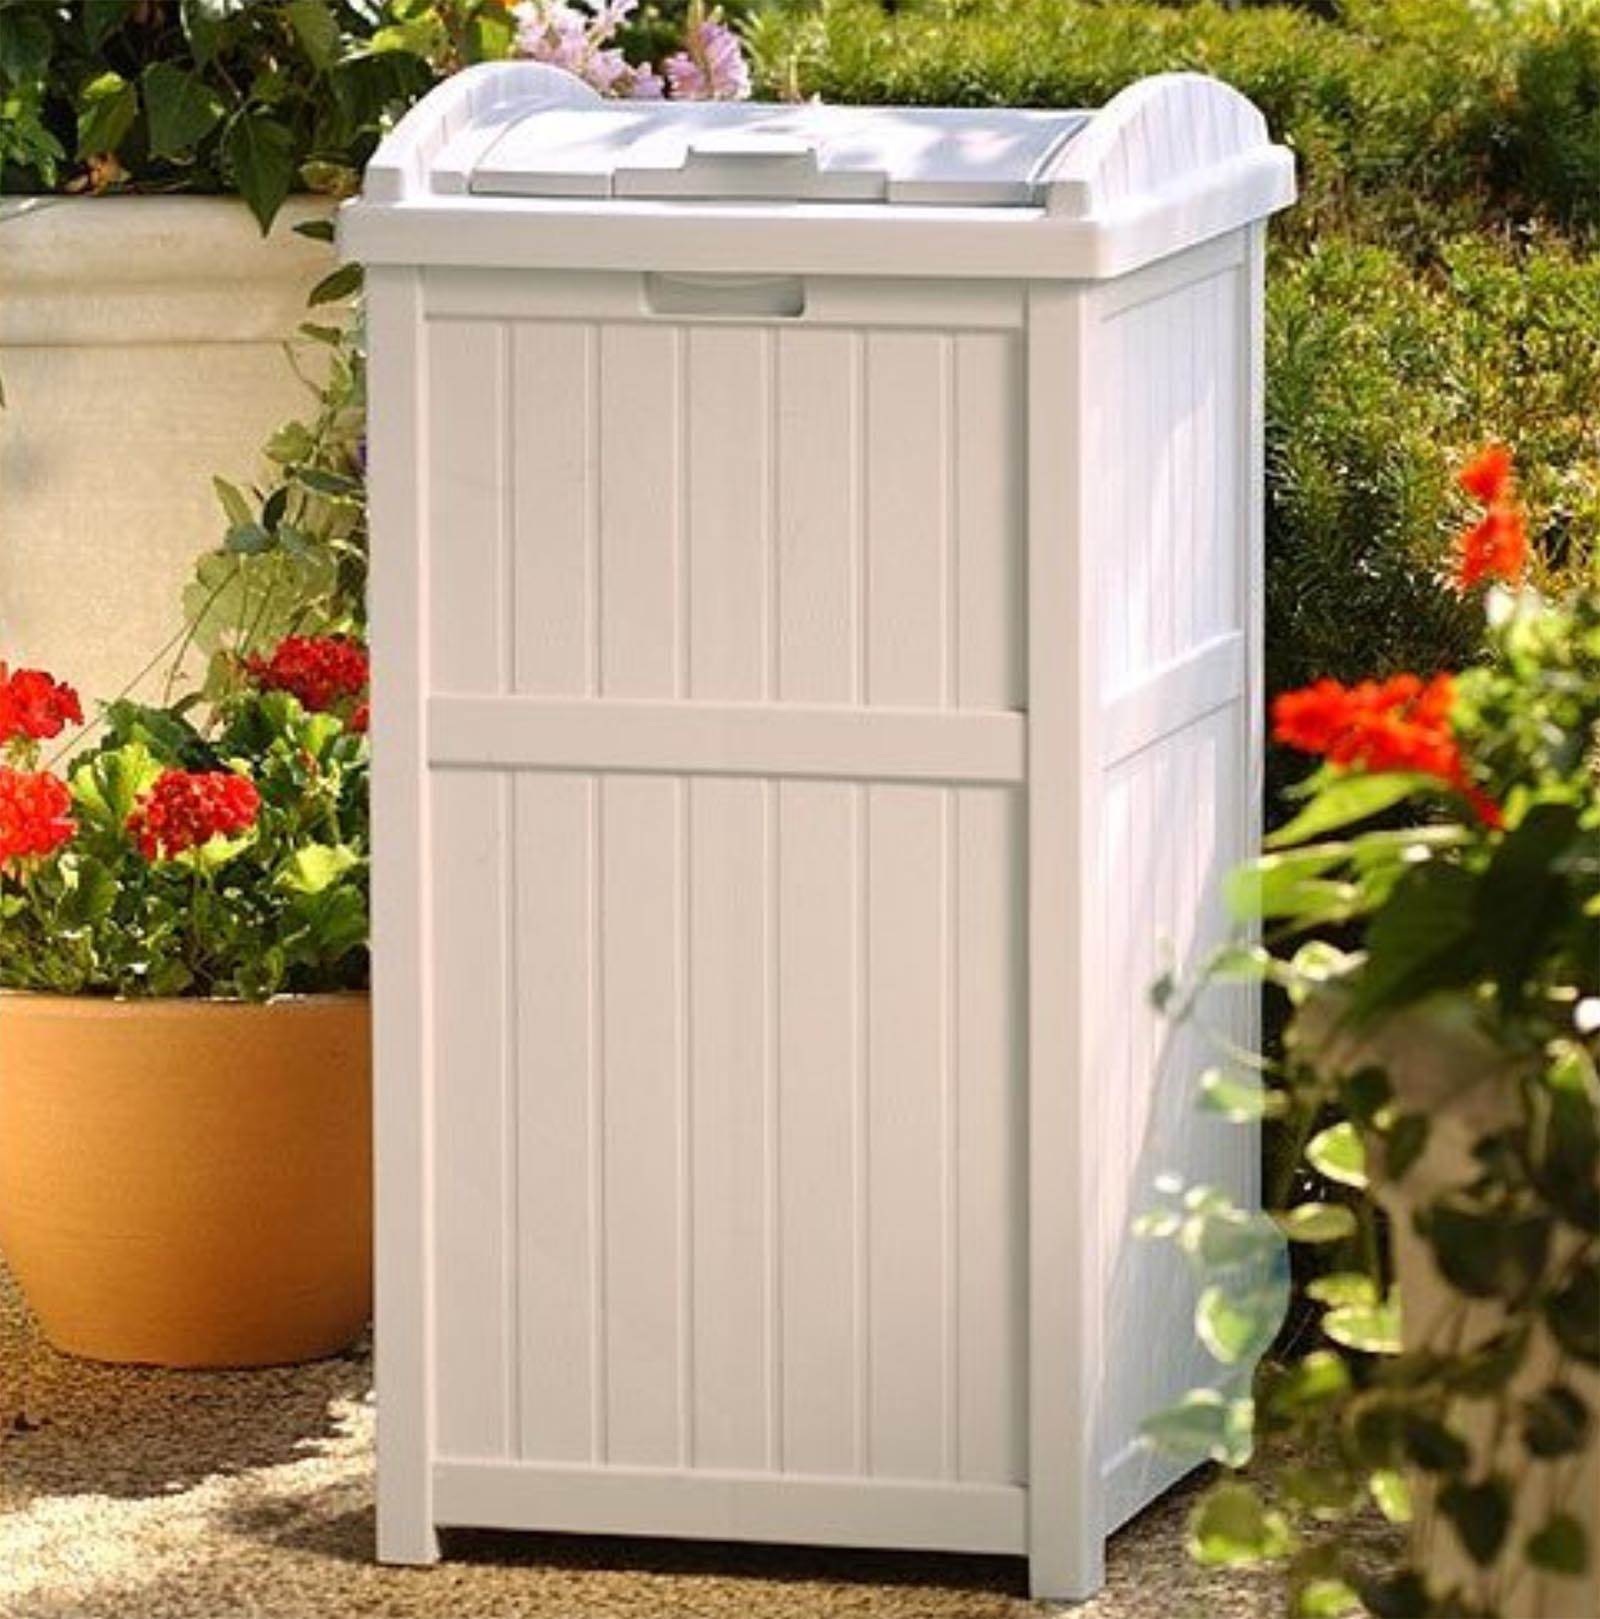 Suncast Trash Hideaway 33 Gallon Capacity Resin Outdoor Garbage Container, Taupe - image 2 of 5